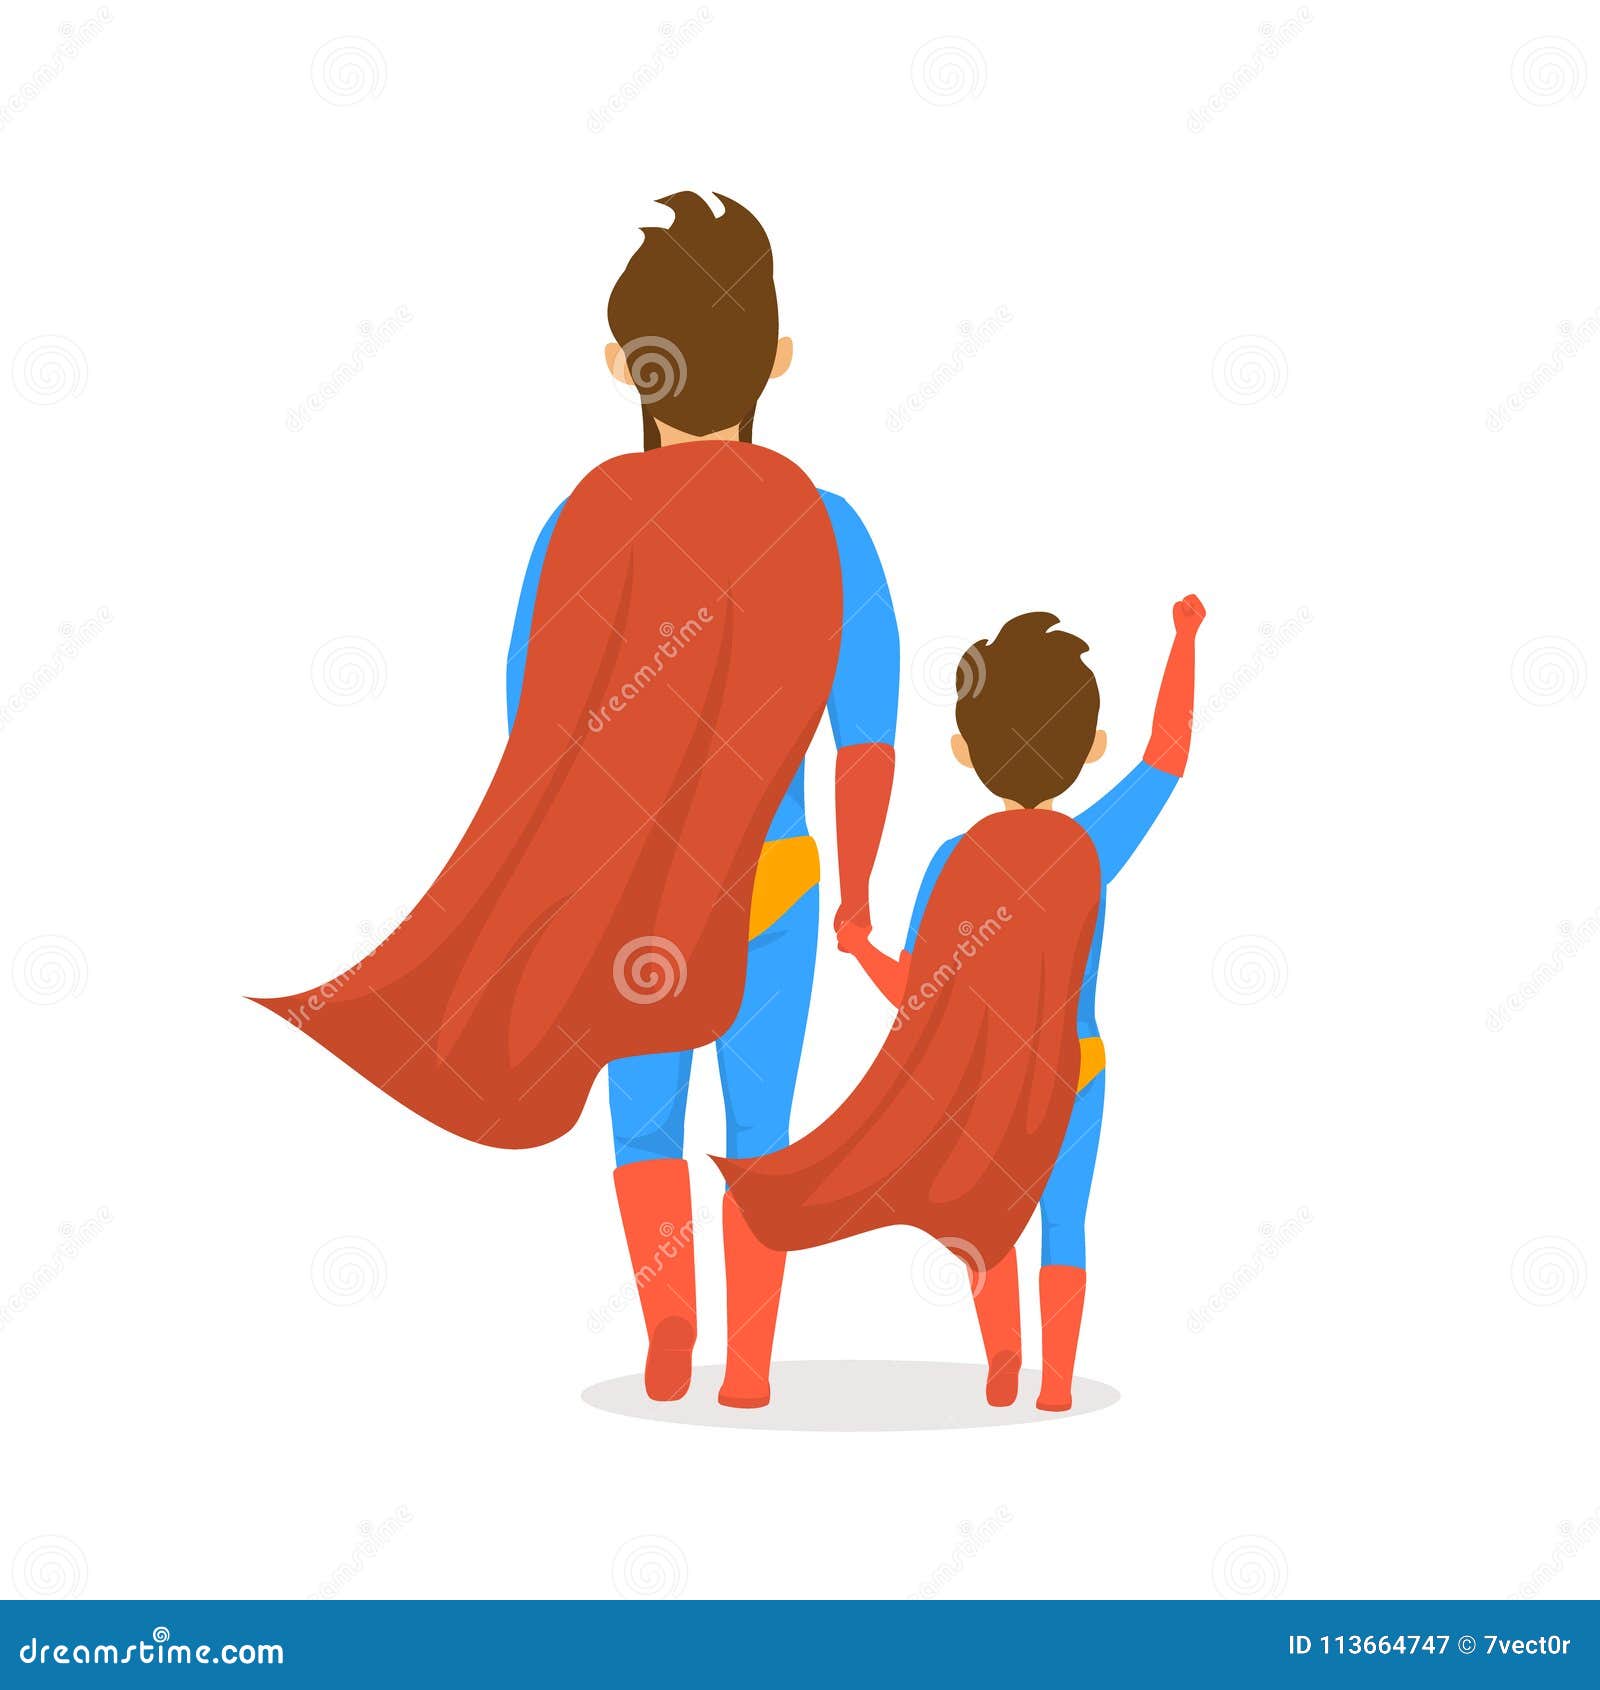 Fathers Day Isolated Vector Illustration Cartoon Backside View Scene with  Dad and Son Dressed in Superhero Costumes Walking Togeth Stock Vector -  Illustration of background, fathers: 113664747